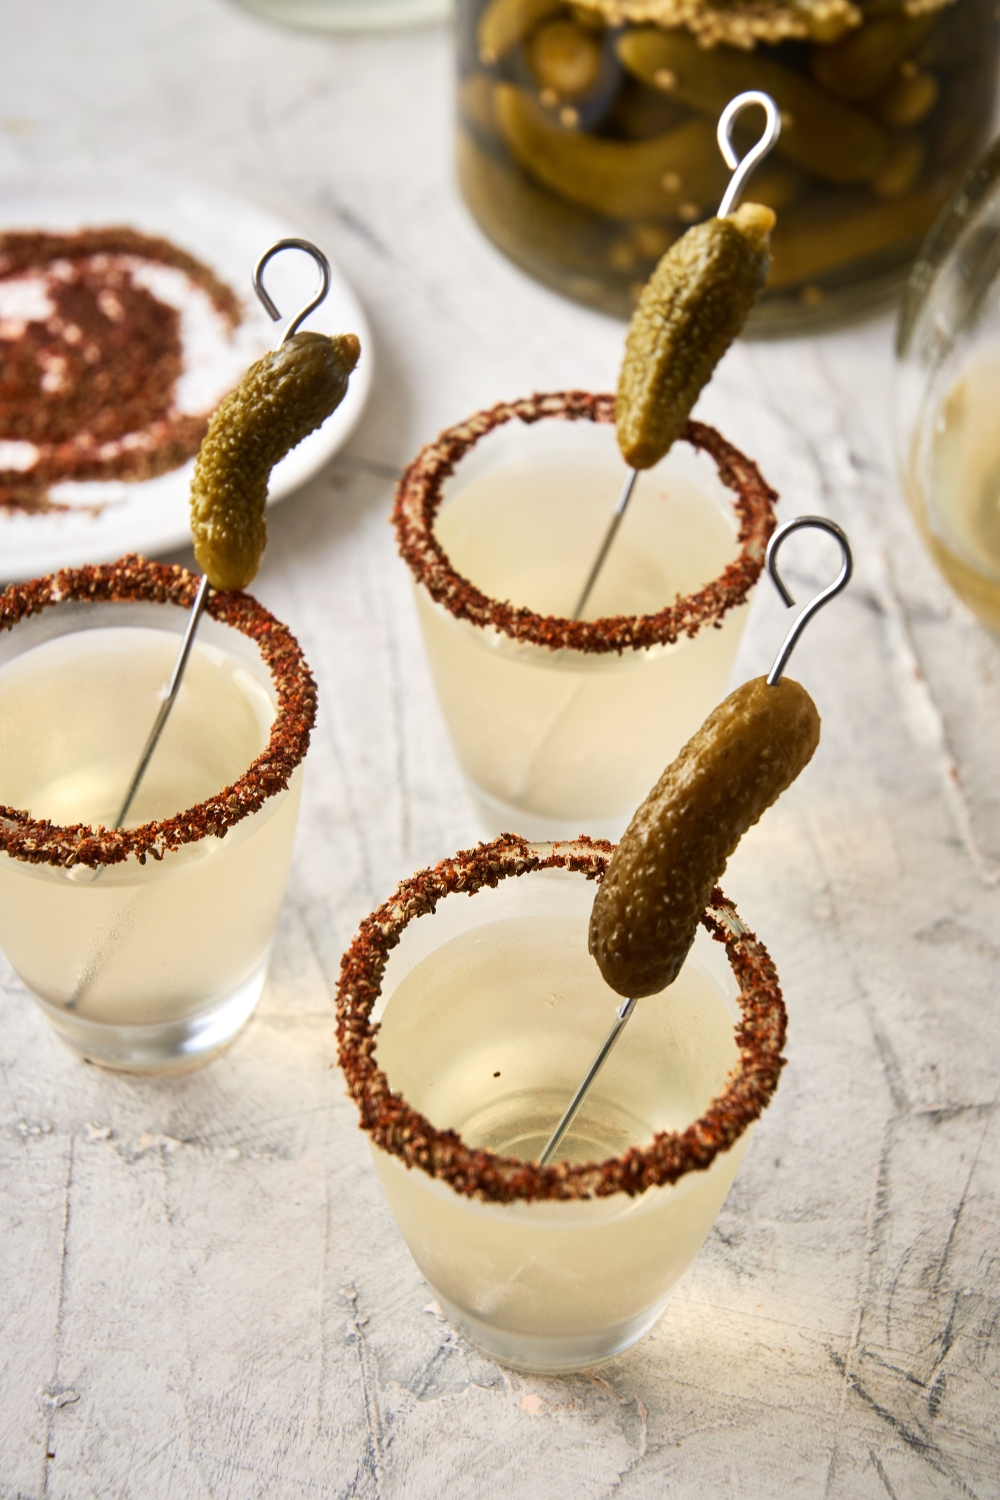 A few shot glasses with pickle shots and a garnished rim with a gerkin pickle.